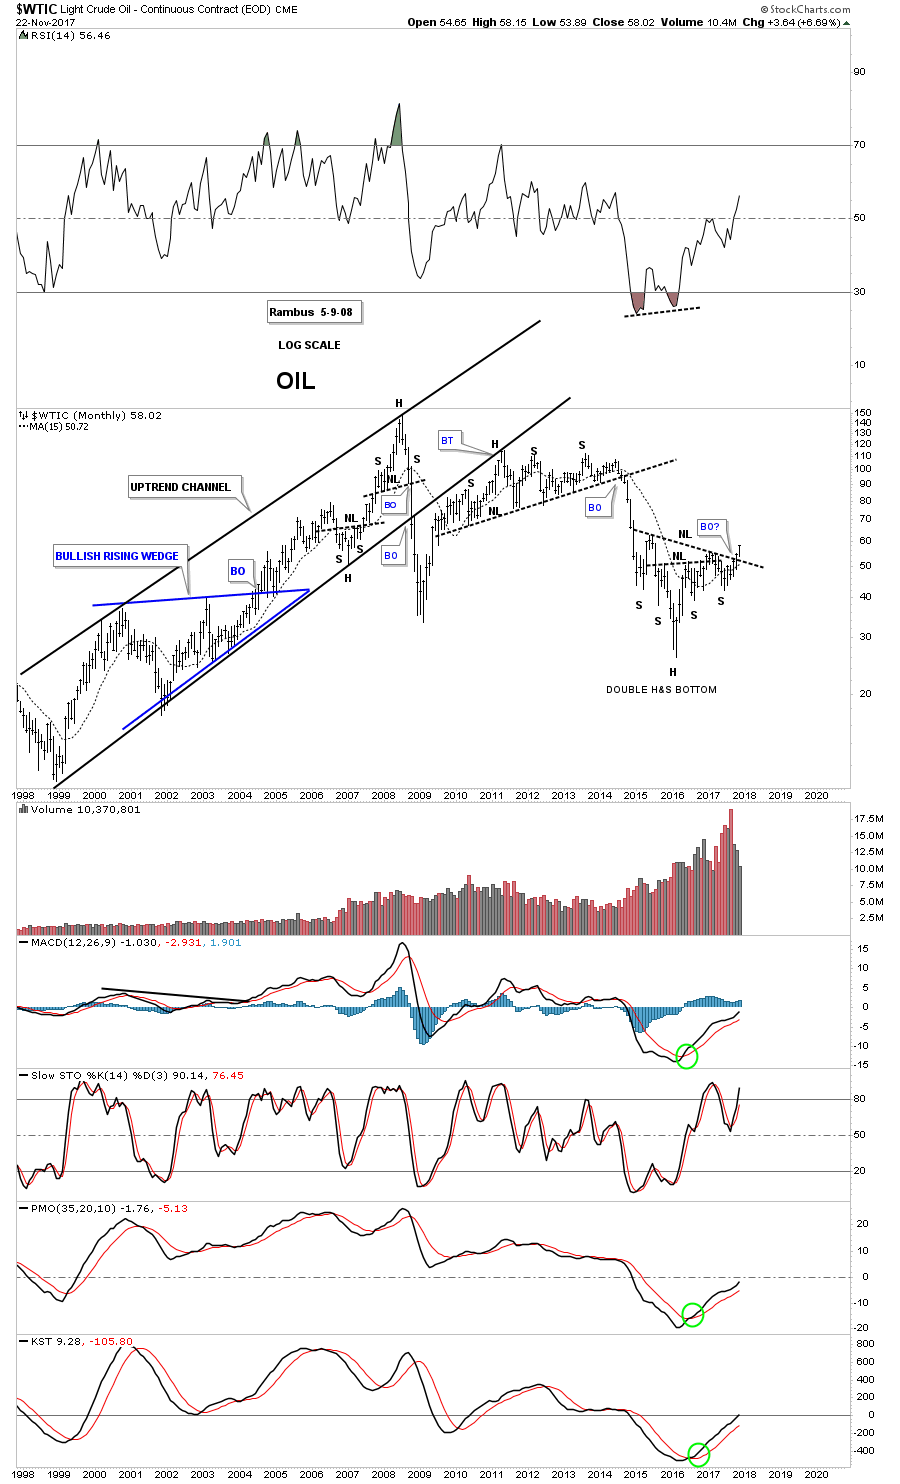 WTIC Monthly 1997-2017